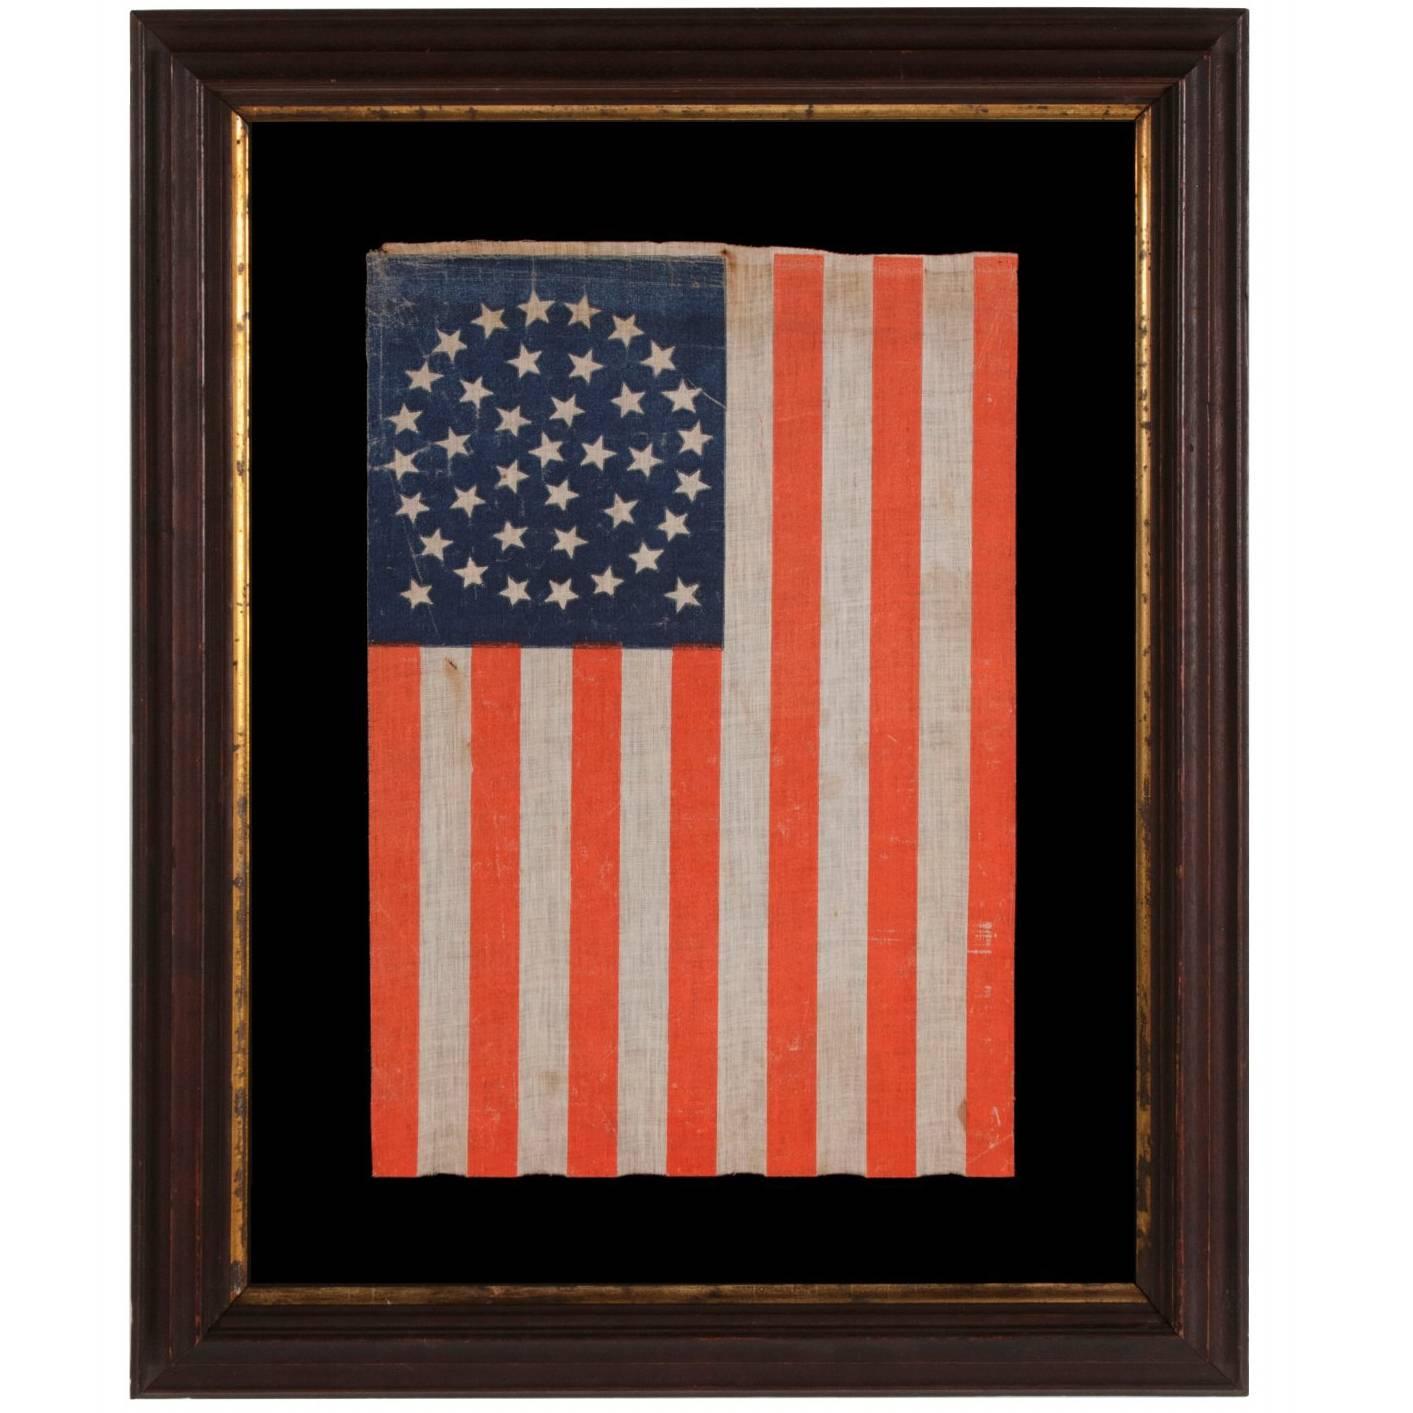 38 Star Flag with Stars in a Beautiful Medallion Configuration with Two Outliers